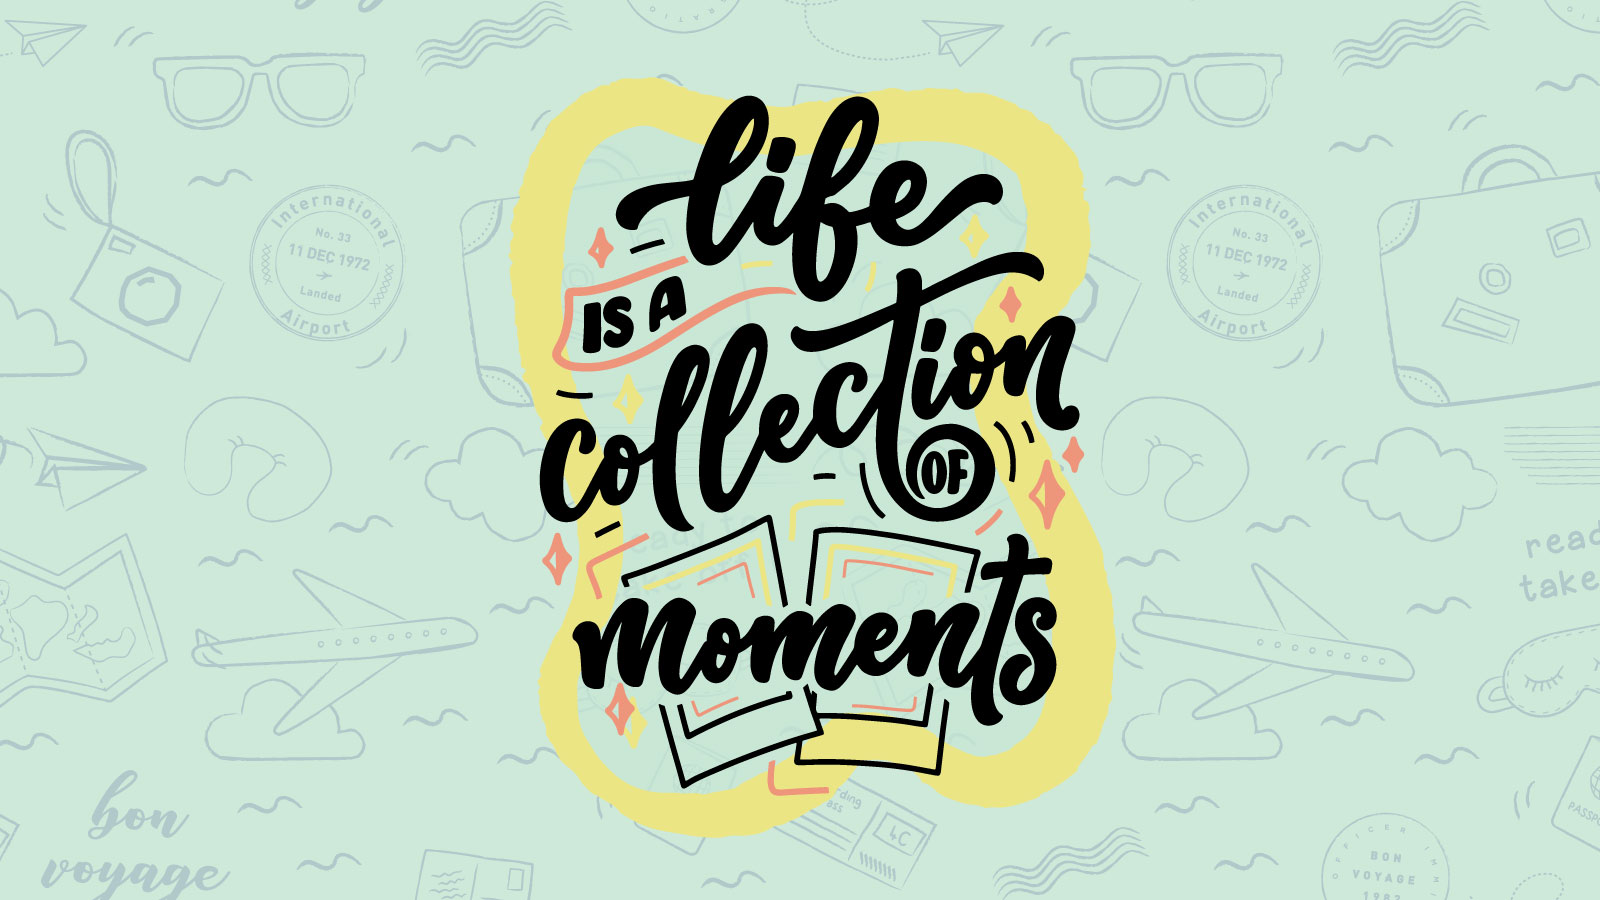 life is a collection of moments